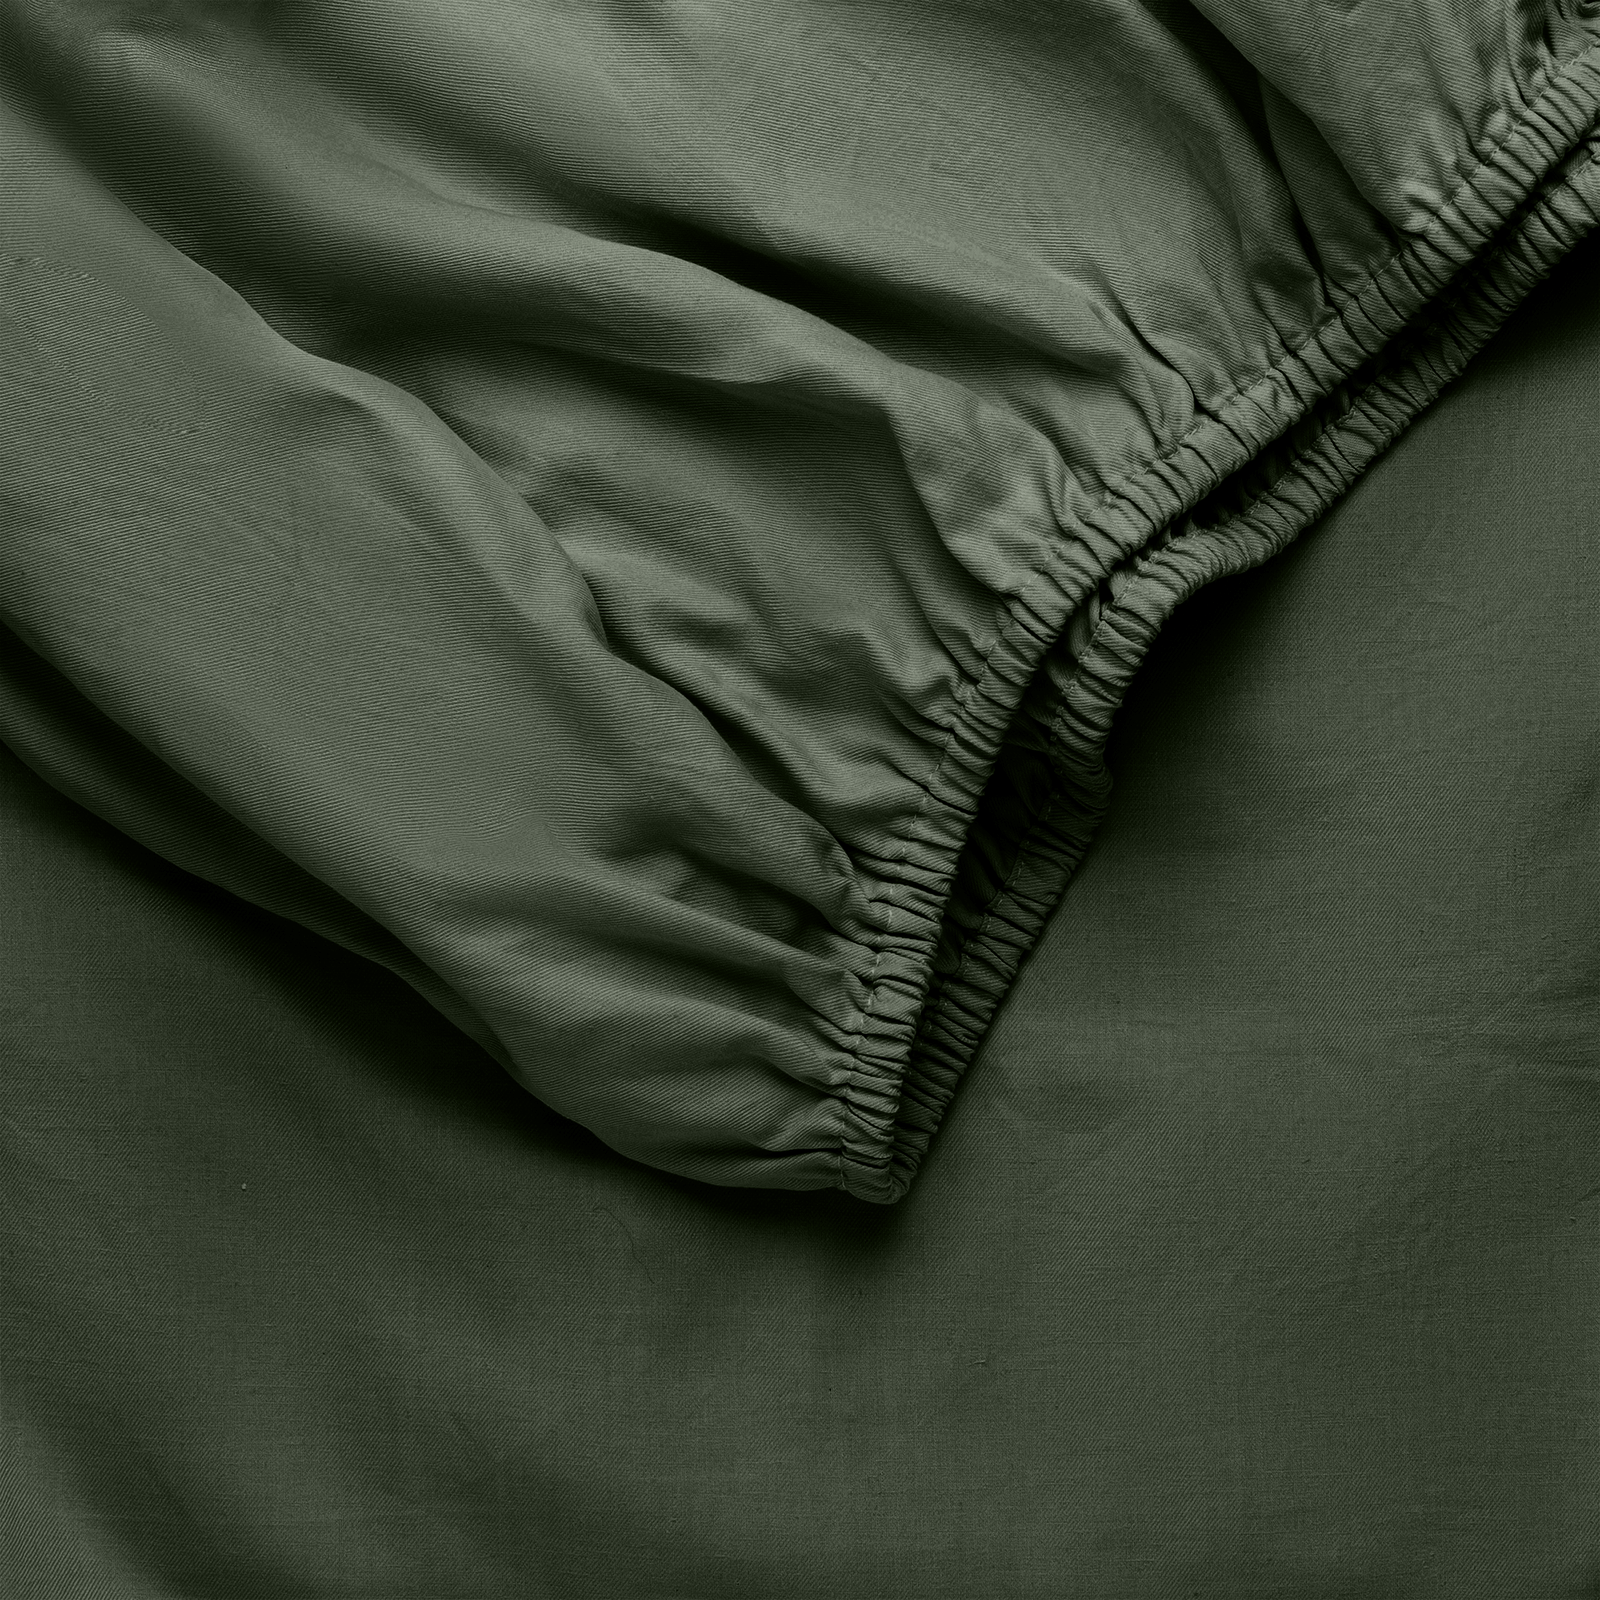 Olive Bamboo Linen Fitted Sheet Folded over itself. 